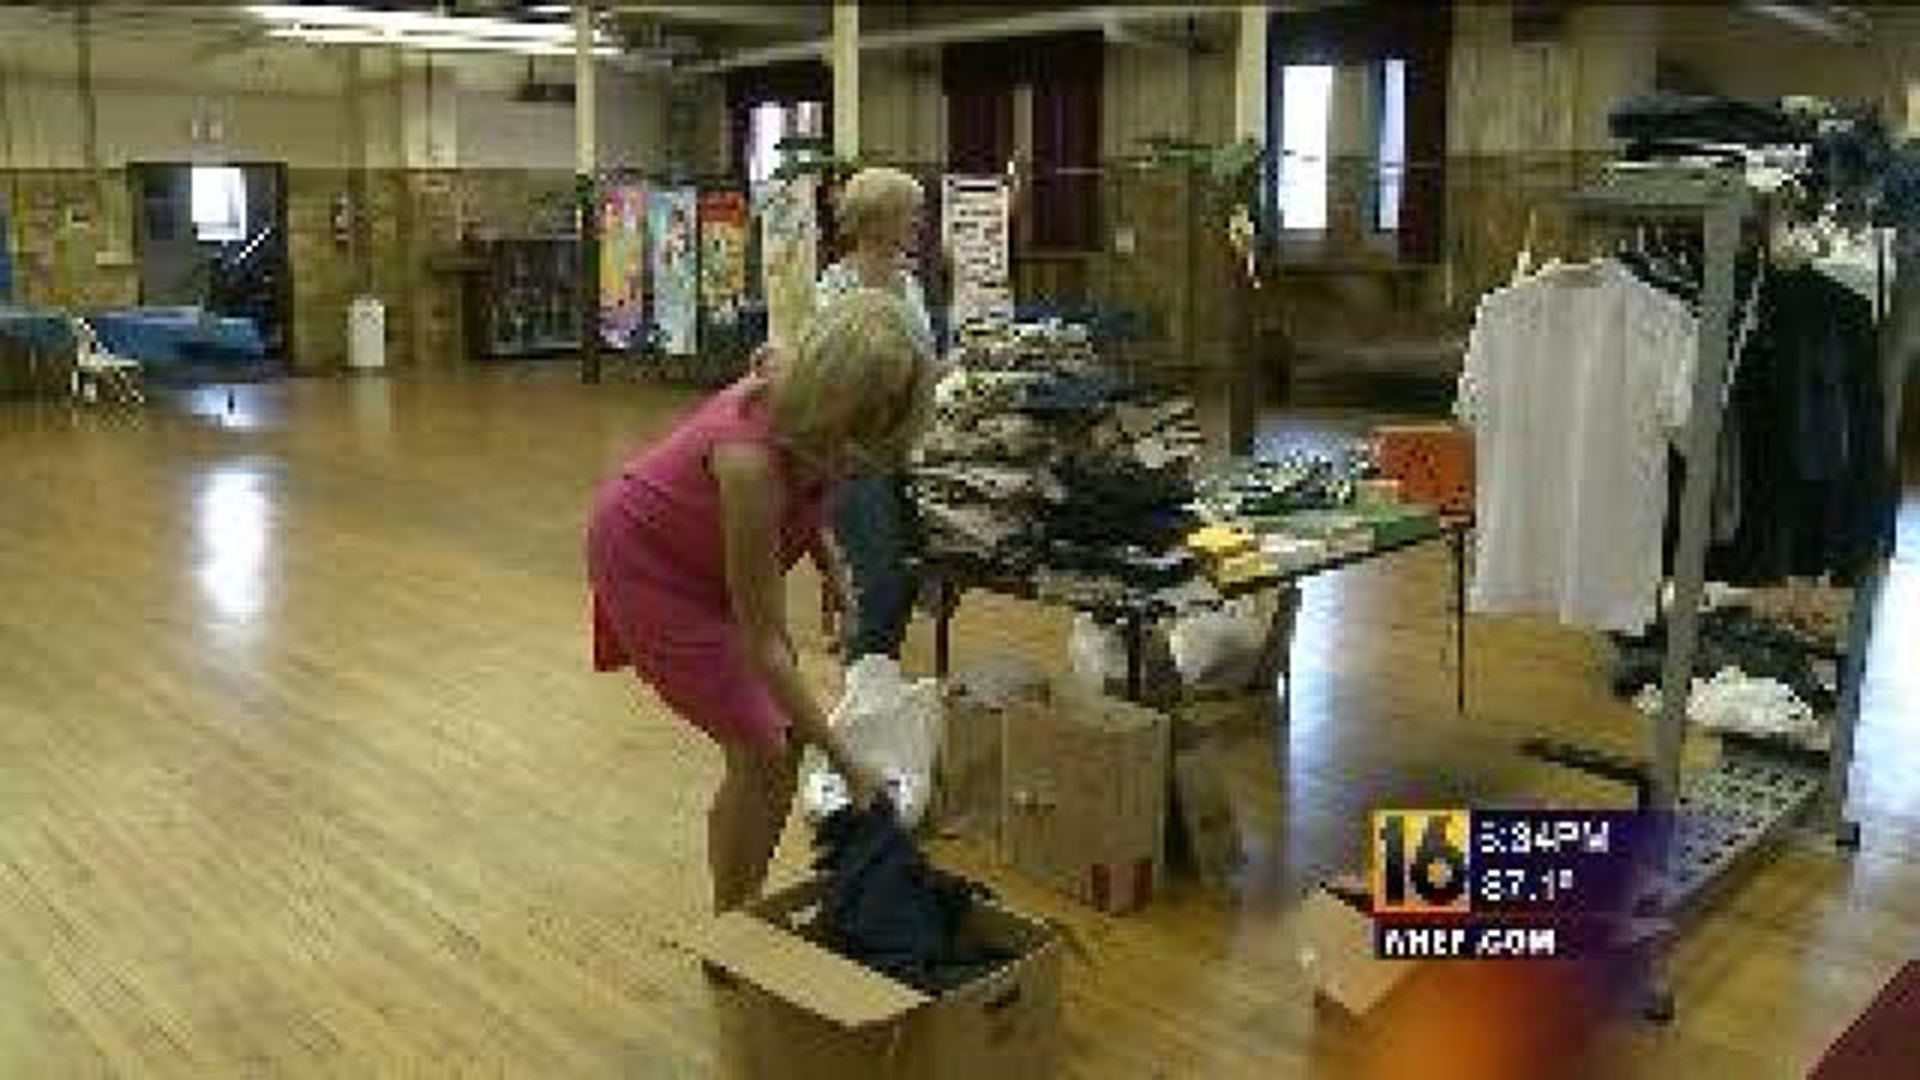 Clothing Students in Tamaqua Area